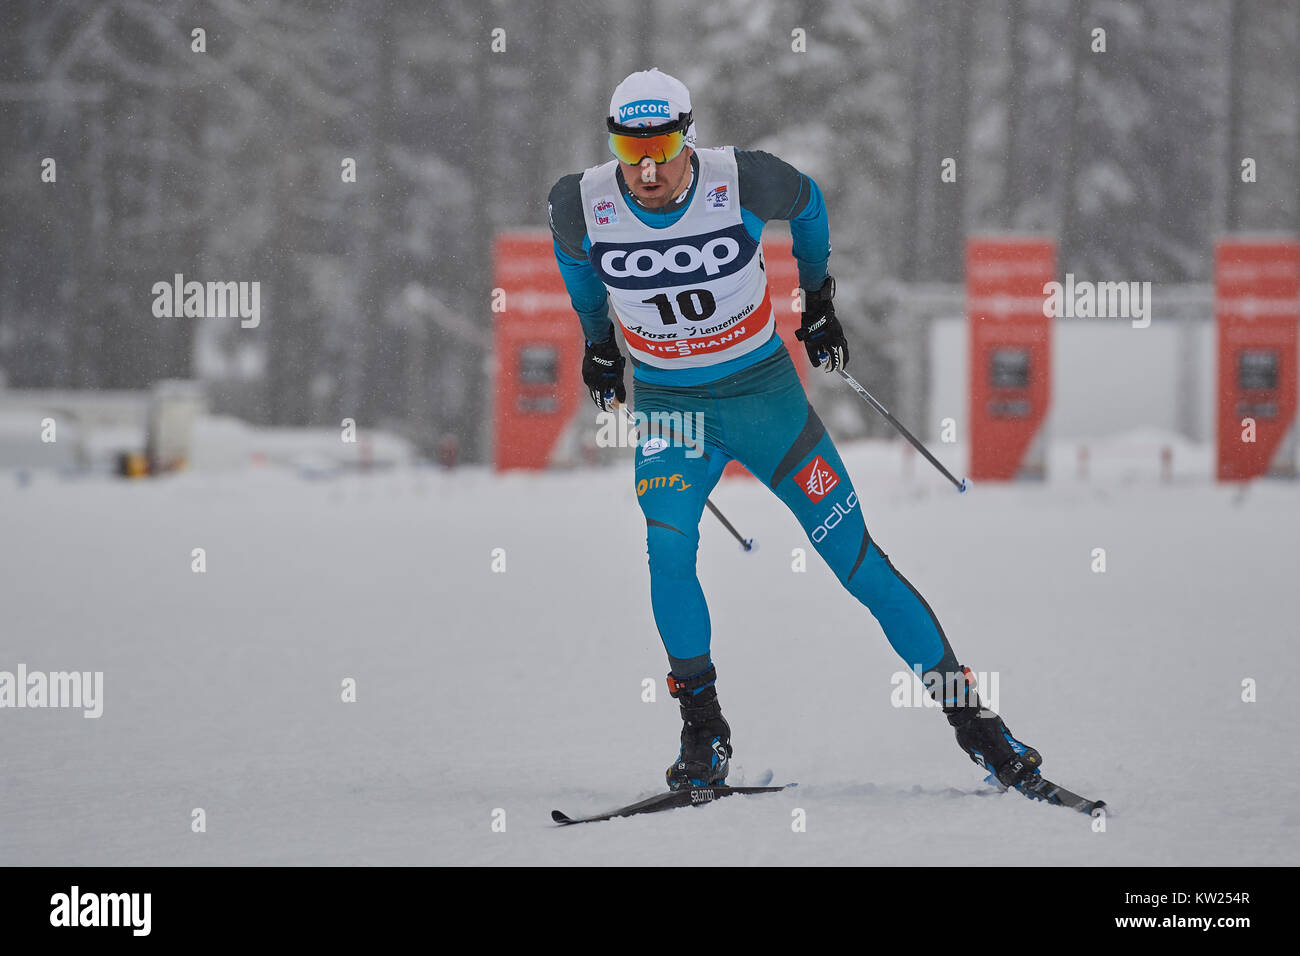 Lenzerheide, Switzerland, 30th December 2017. MANIFICAT Maurice (FRA) during the Mens 1.5 km Sprint Competition at the FIS Cross Country Worldcup Tour de Ski 2017 in Lenzerheide. © Rolf Simeon/Proclaim/Alamy Live News Stock Photo